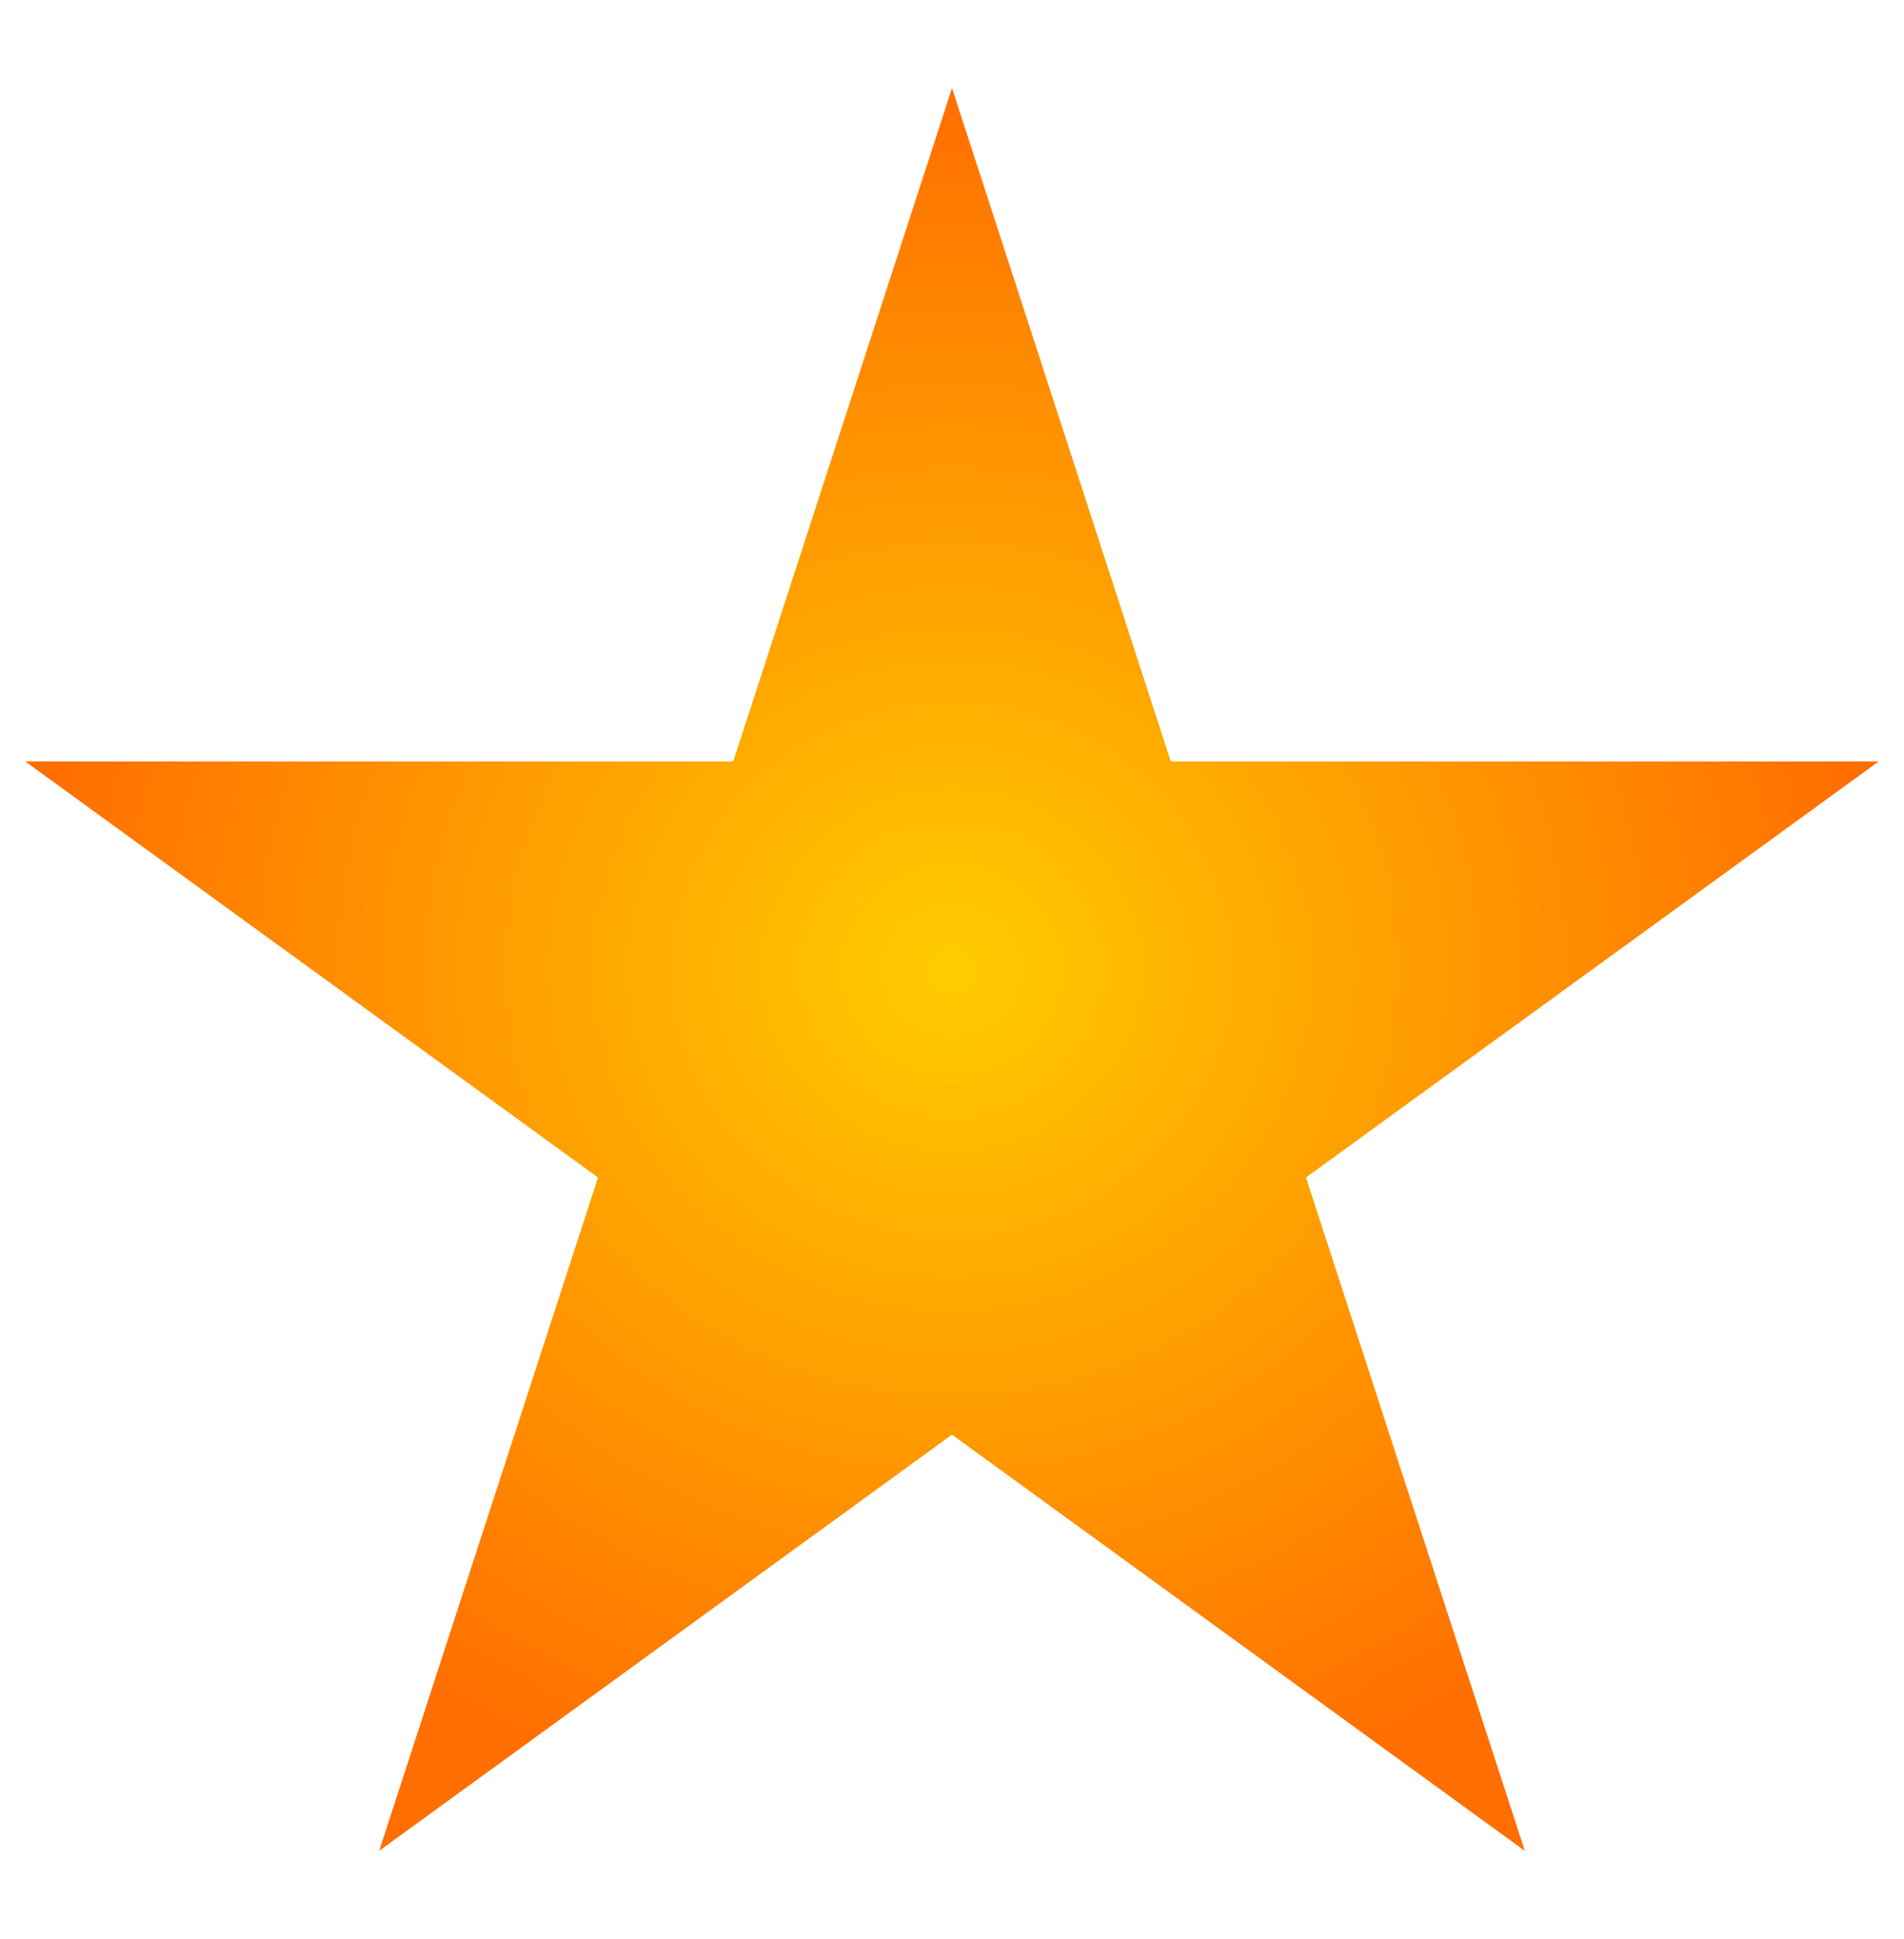 Download PNG image: star PNG image #612 - Free Icons and PNG Backgrounds